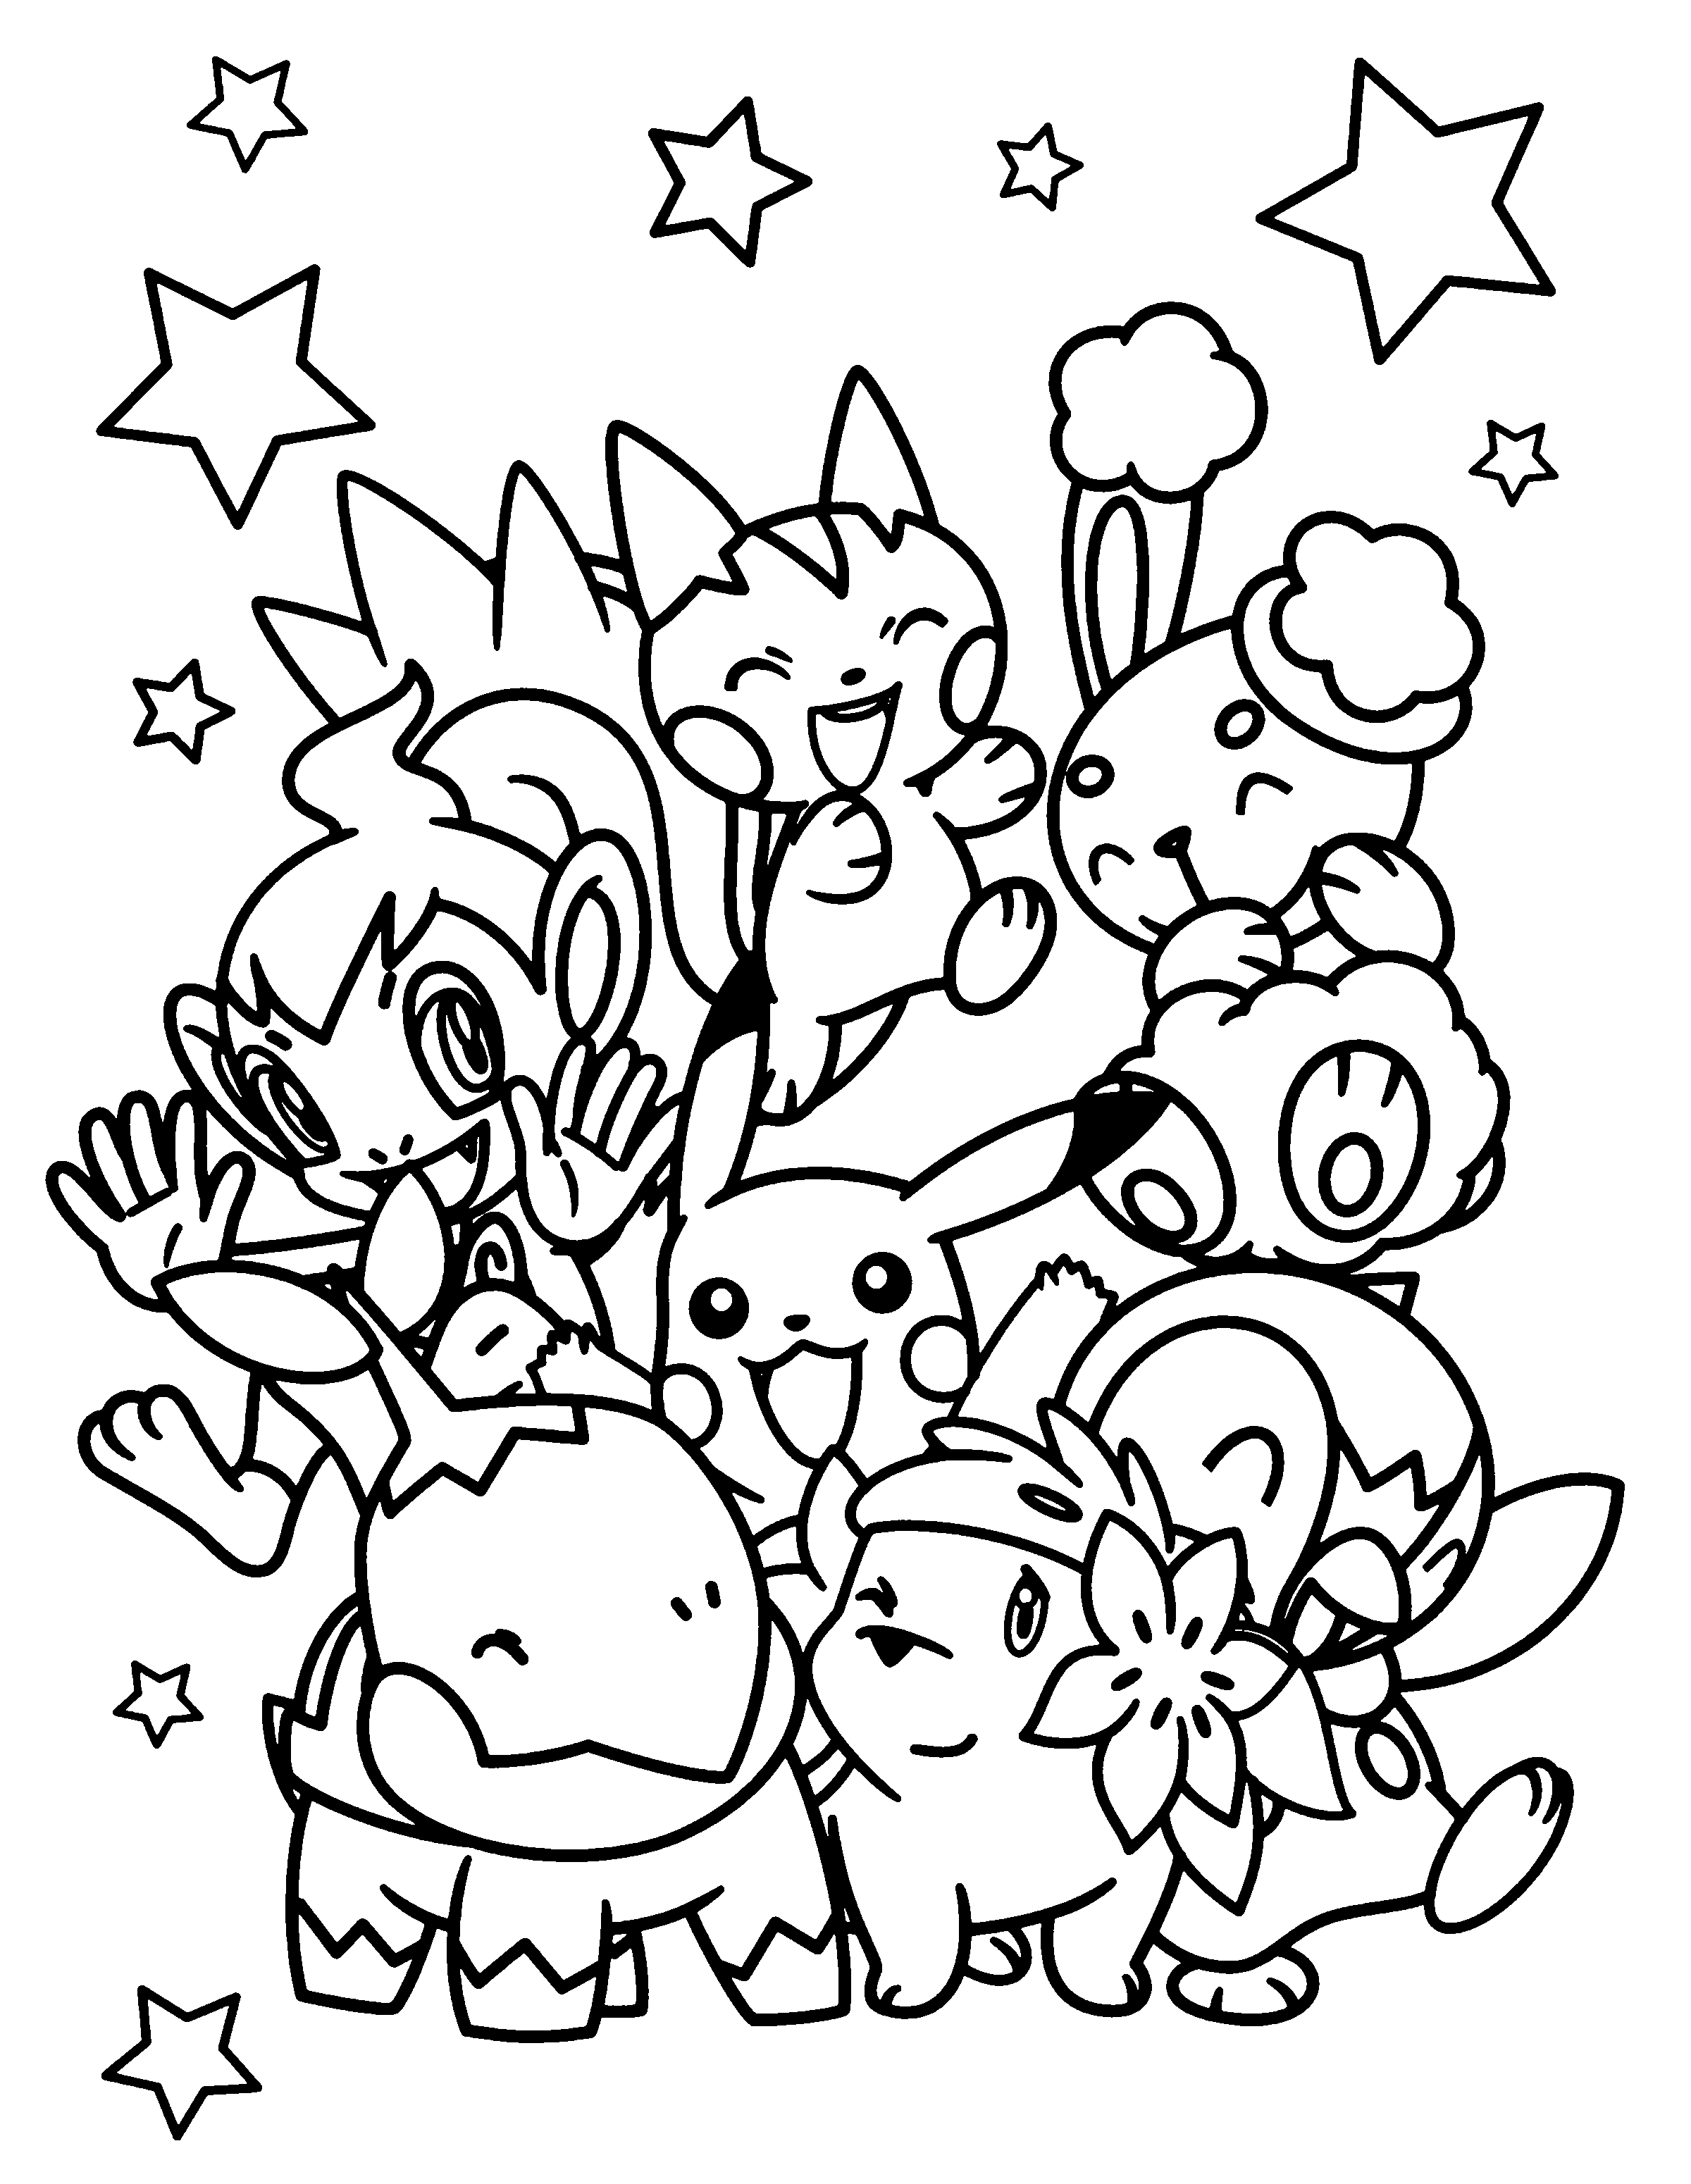 Cool Pokemons 1 Coloring Page